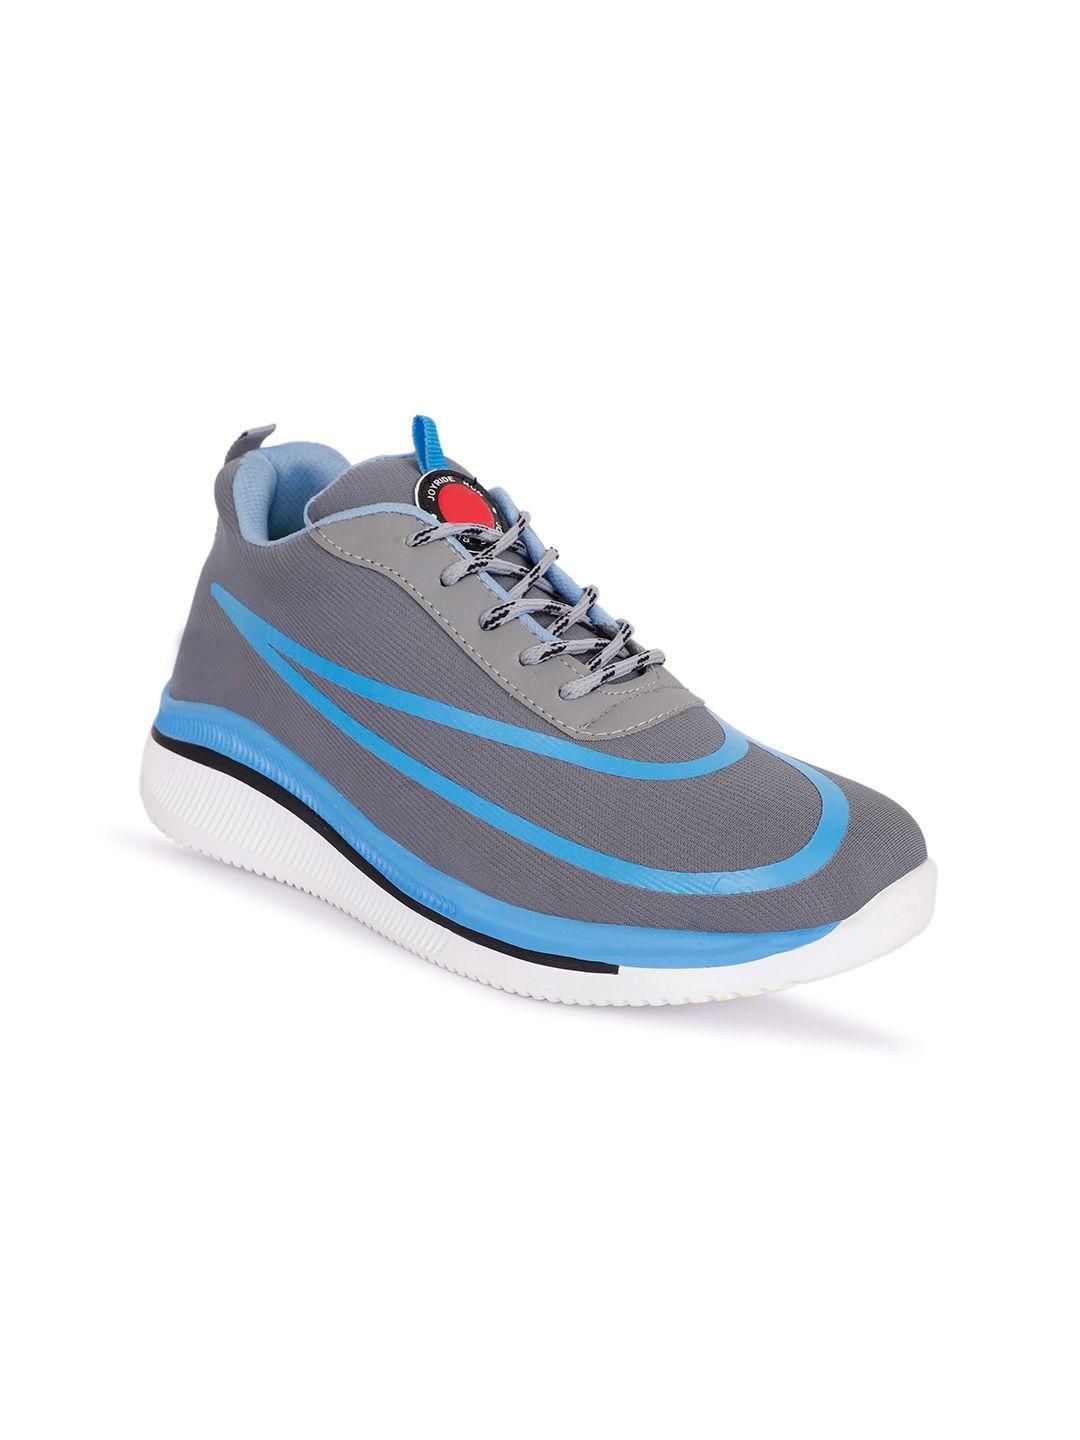 WIN9 Men Grey Casual Laceup Comfortable Sports Shoes - Deal IND.